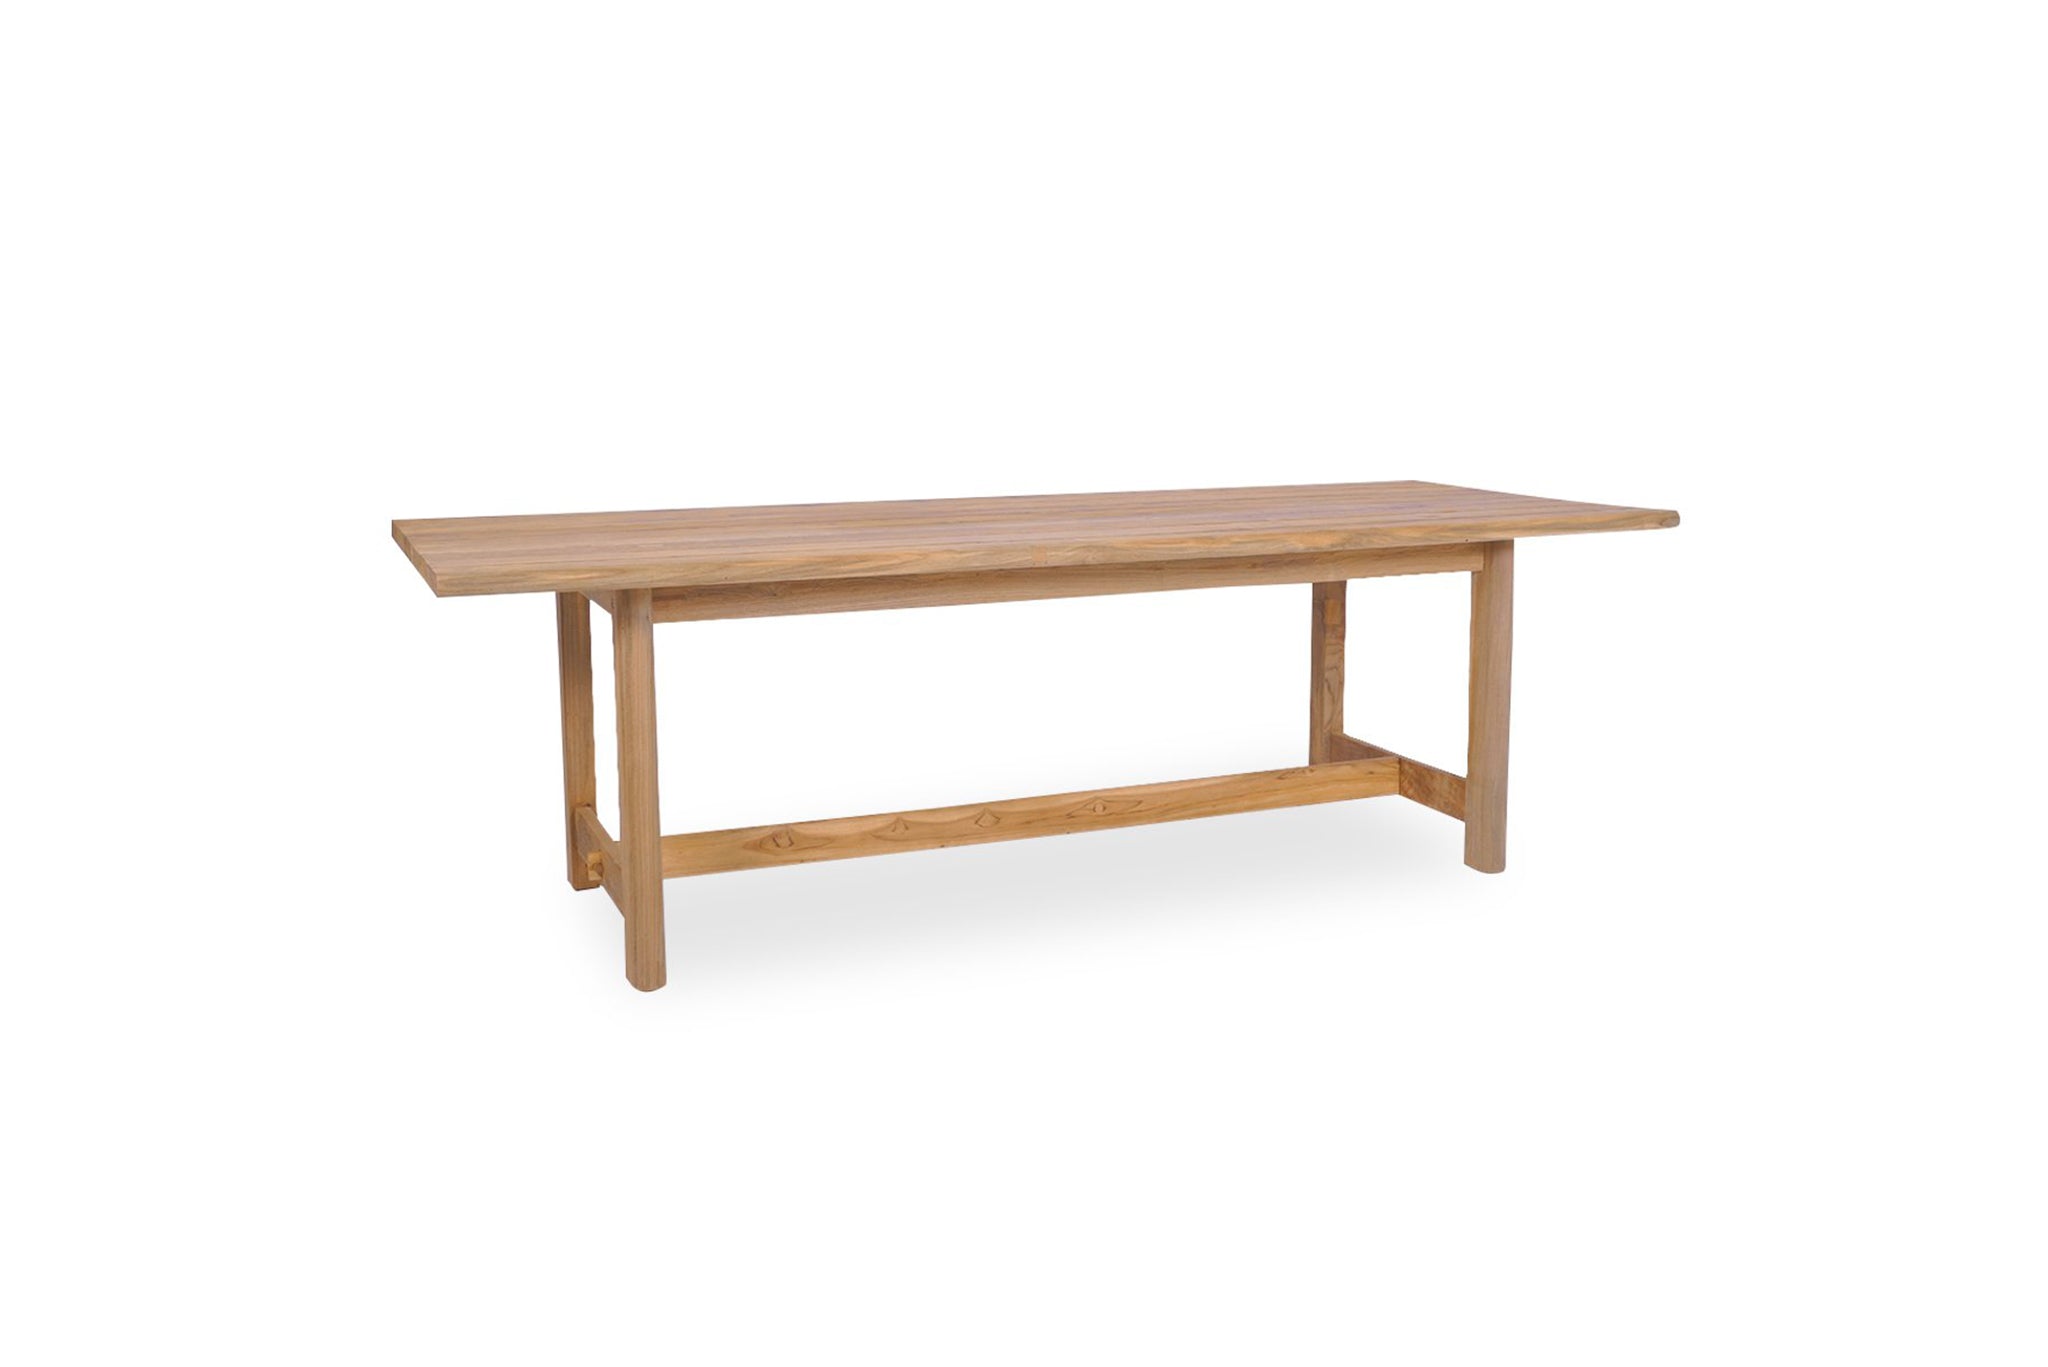 Manly Reclaimed Teak Outdoor Dining Table – 3m